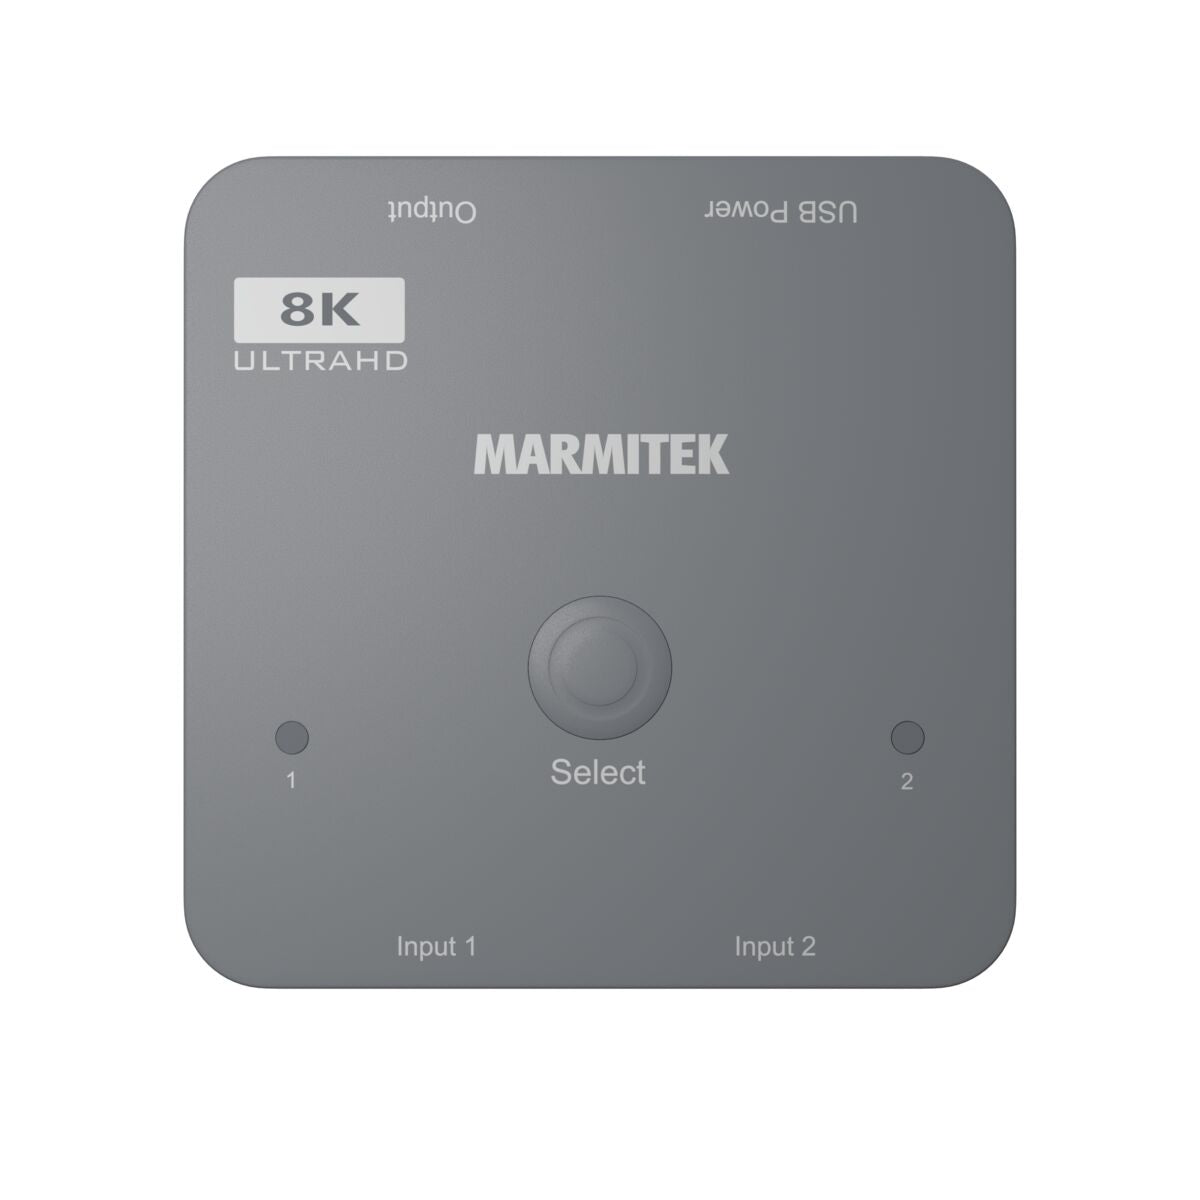 Connect 720 - HDMI switch 4K 120Hz, 8K 60Hz - 2 in / 1 out - TopView Image with select button | Marmitek